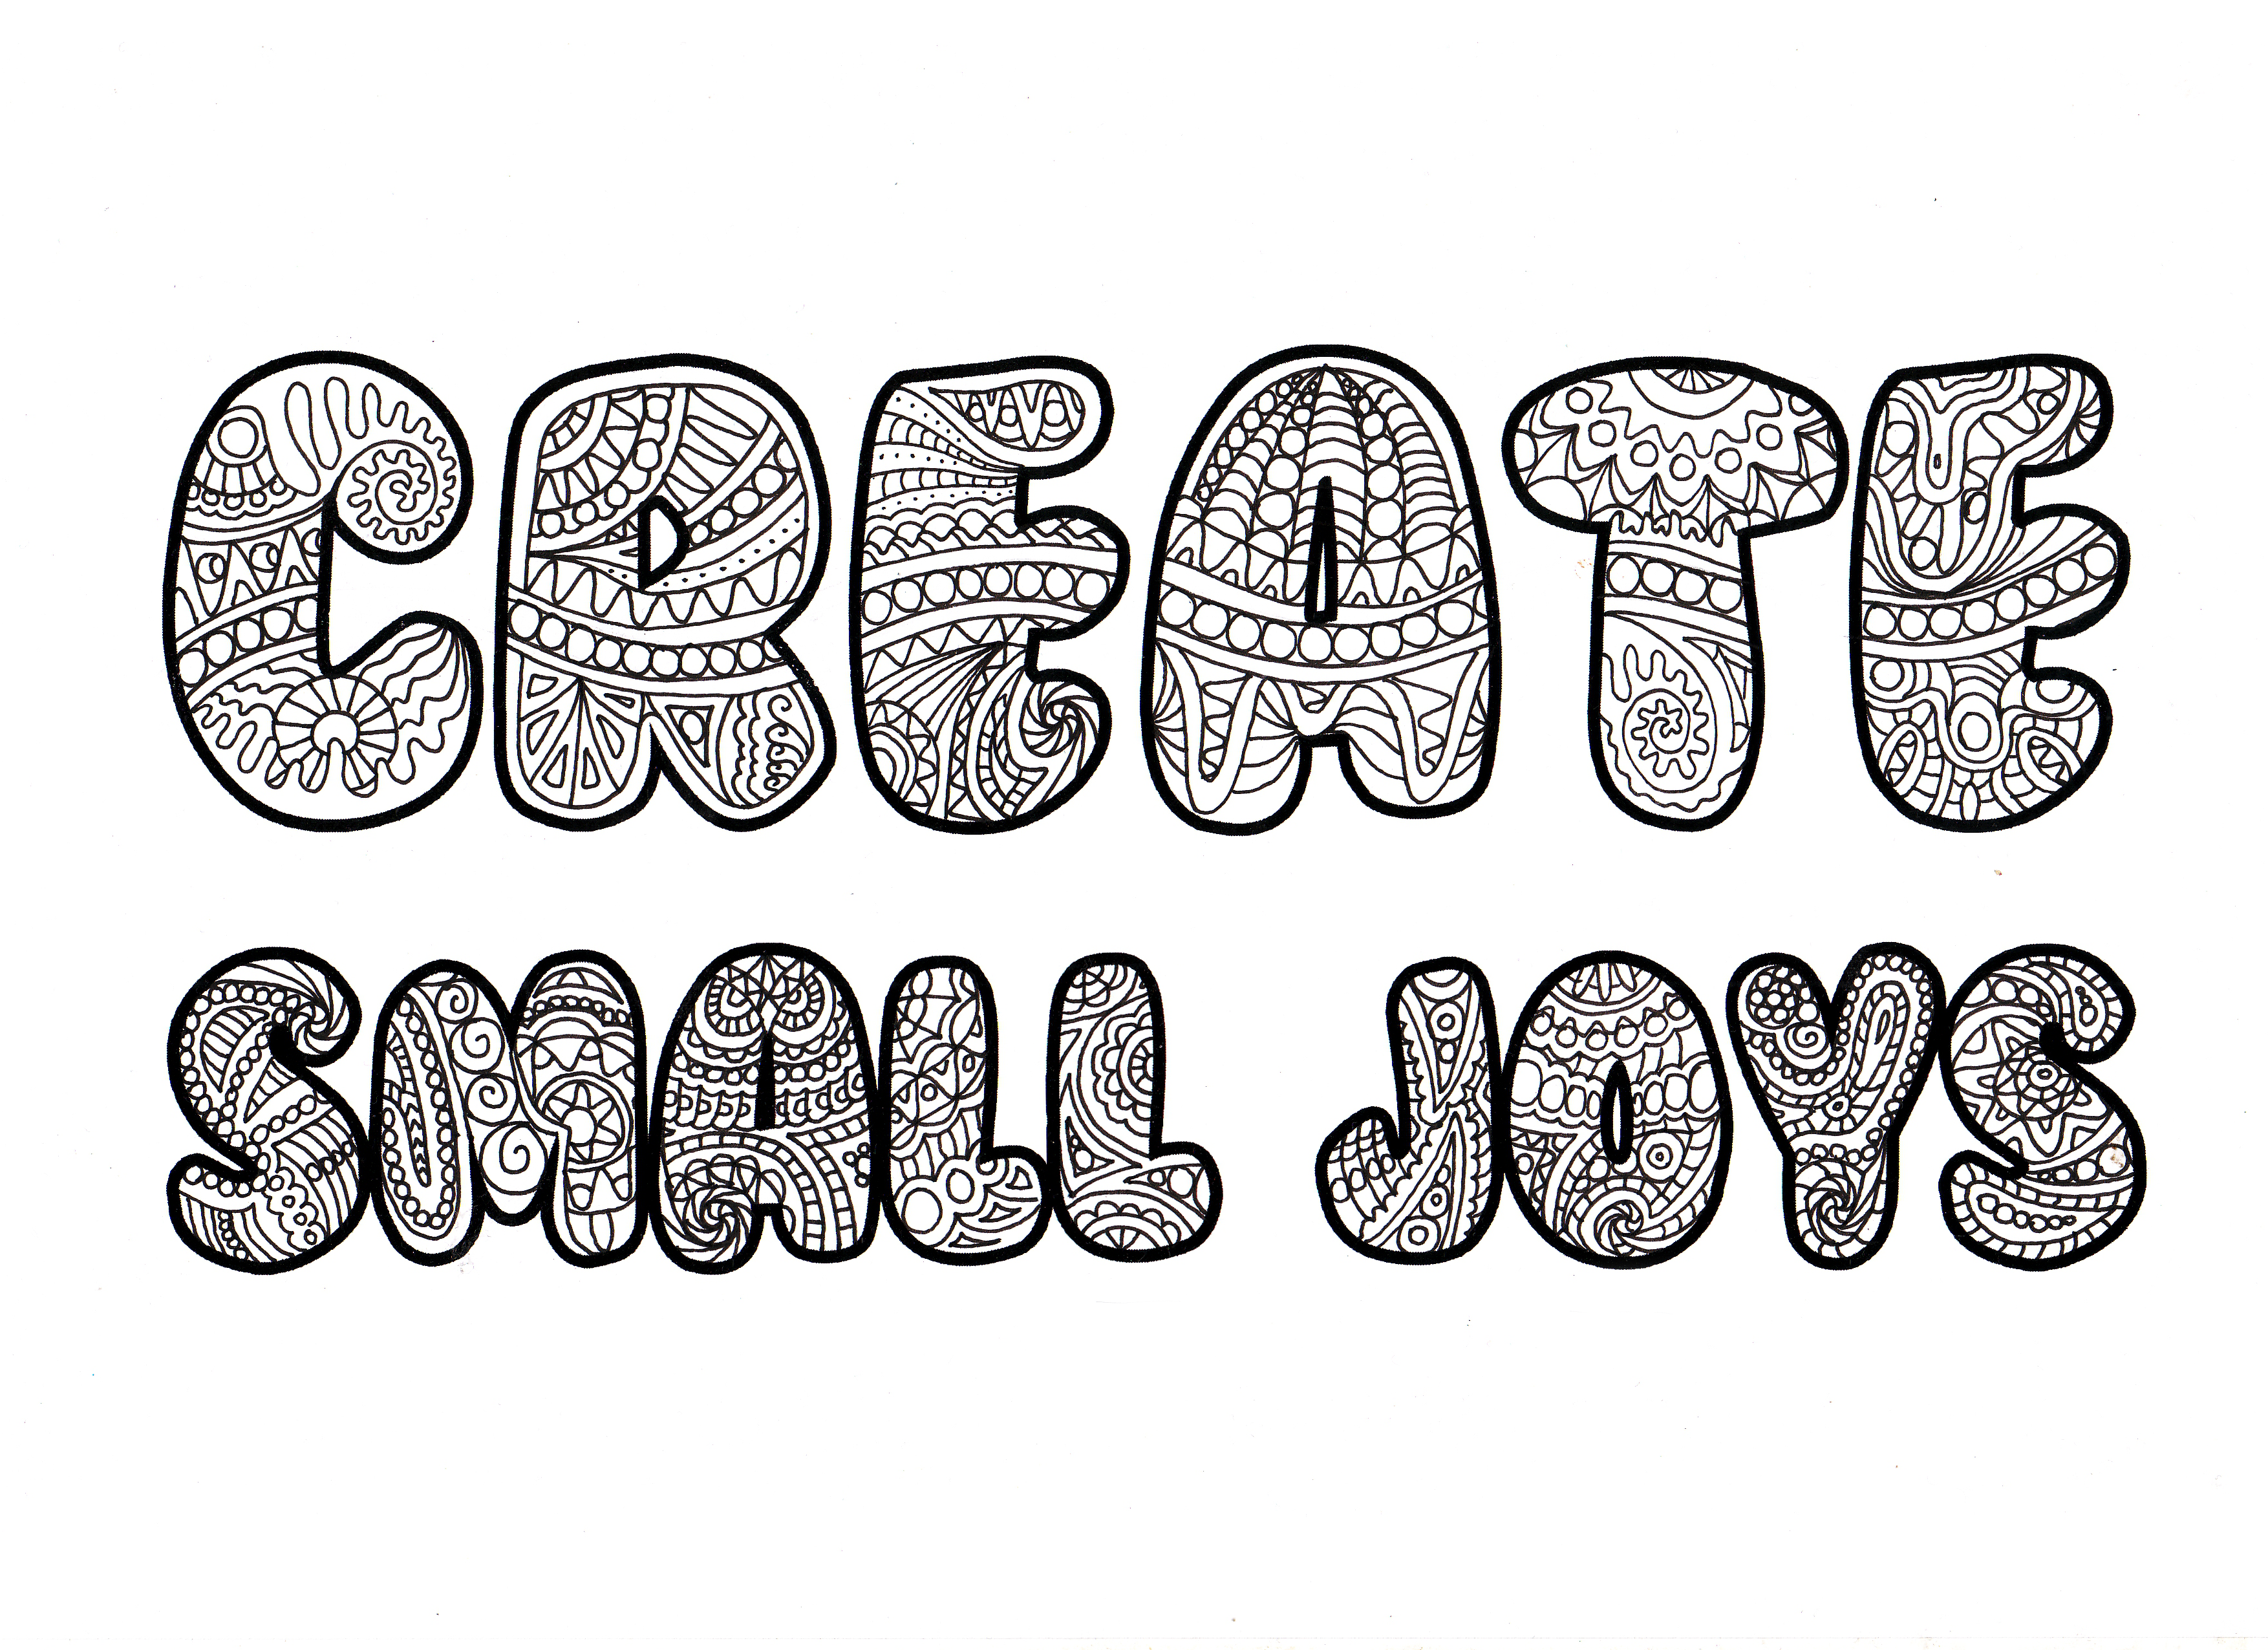 A black and white letters saying "Create Small Joys" filled with black doodles in the form of a coloring page